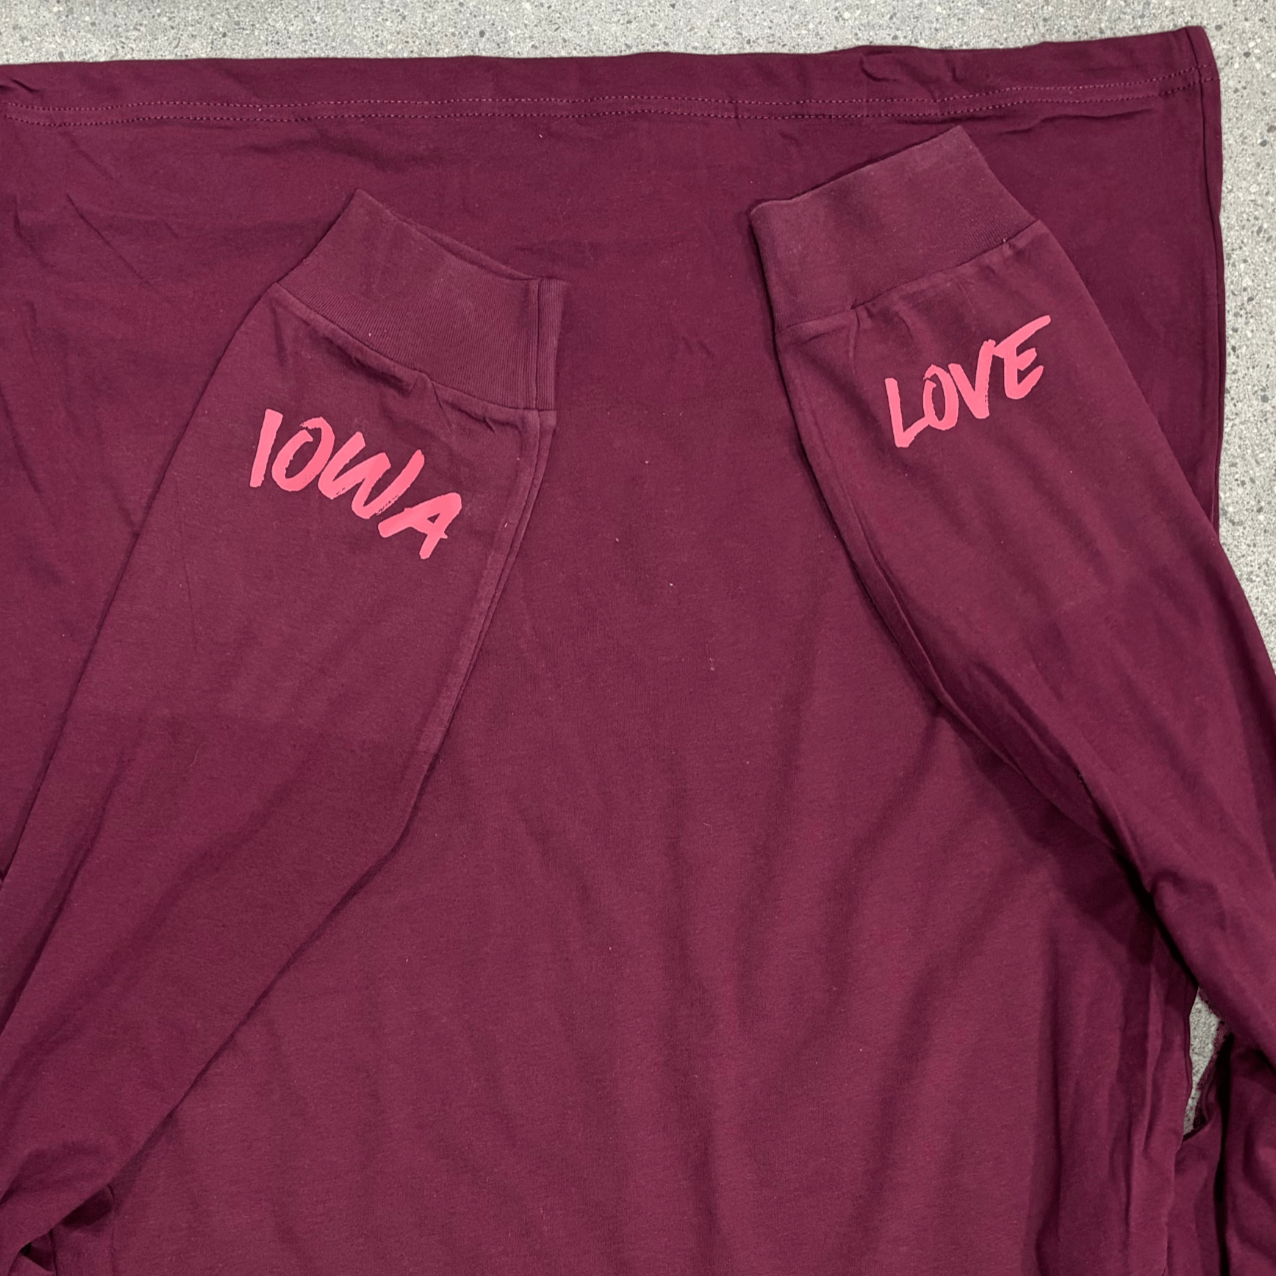 "Iowa love" Long Sleeve in Maroon with Cuff Message